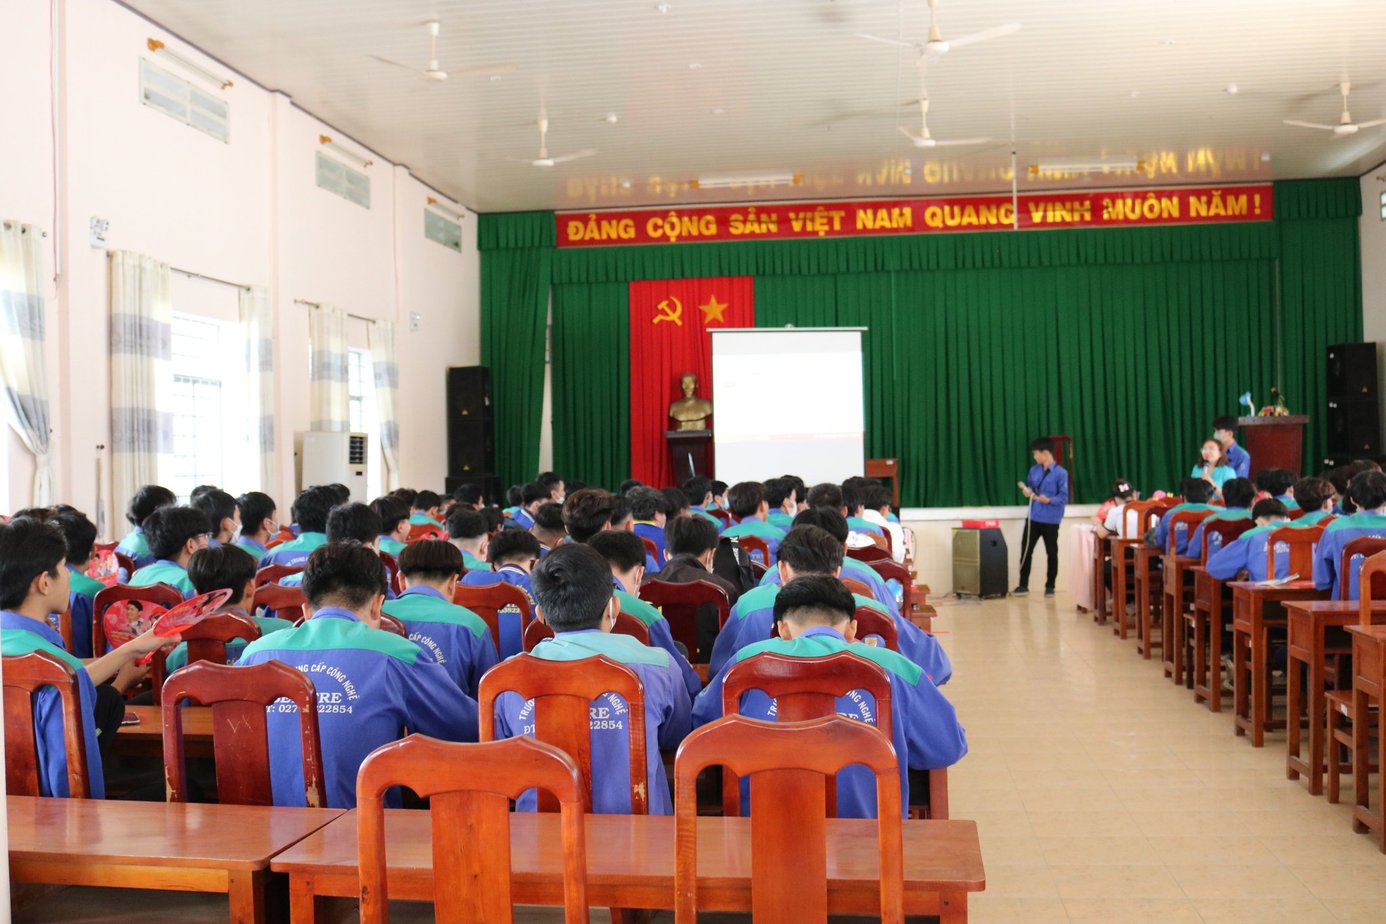 Vocational training in auto repair at Ben Tre High School of Technology